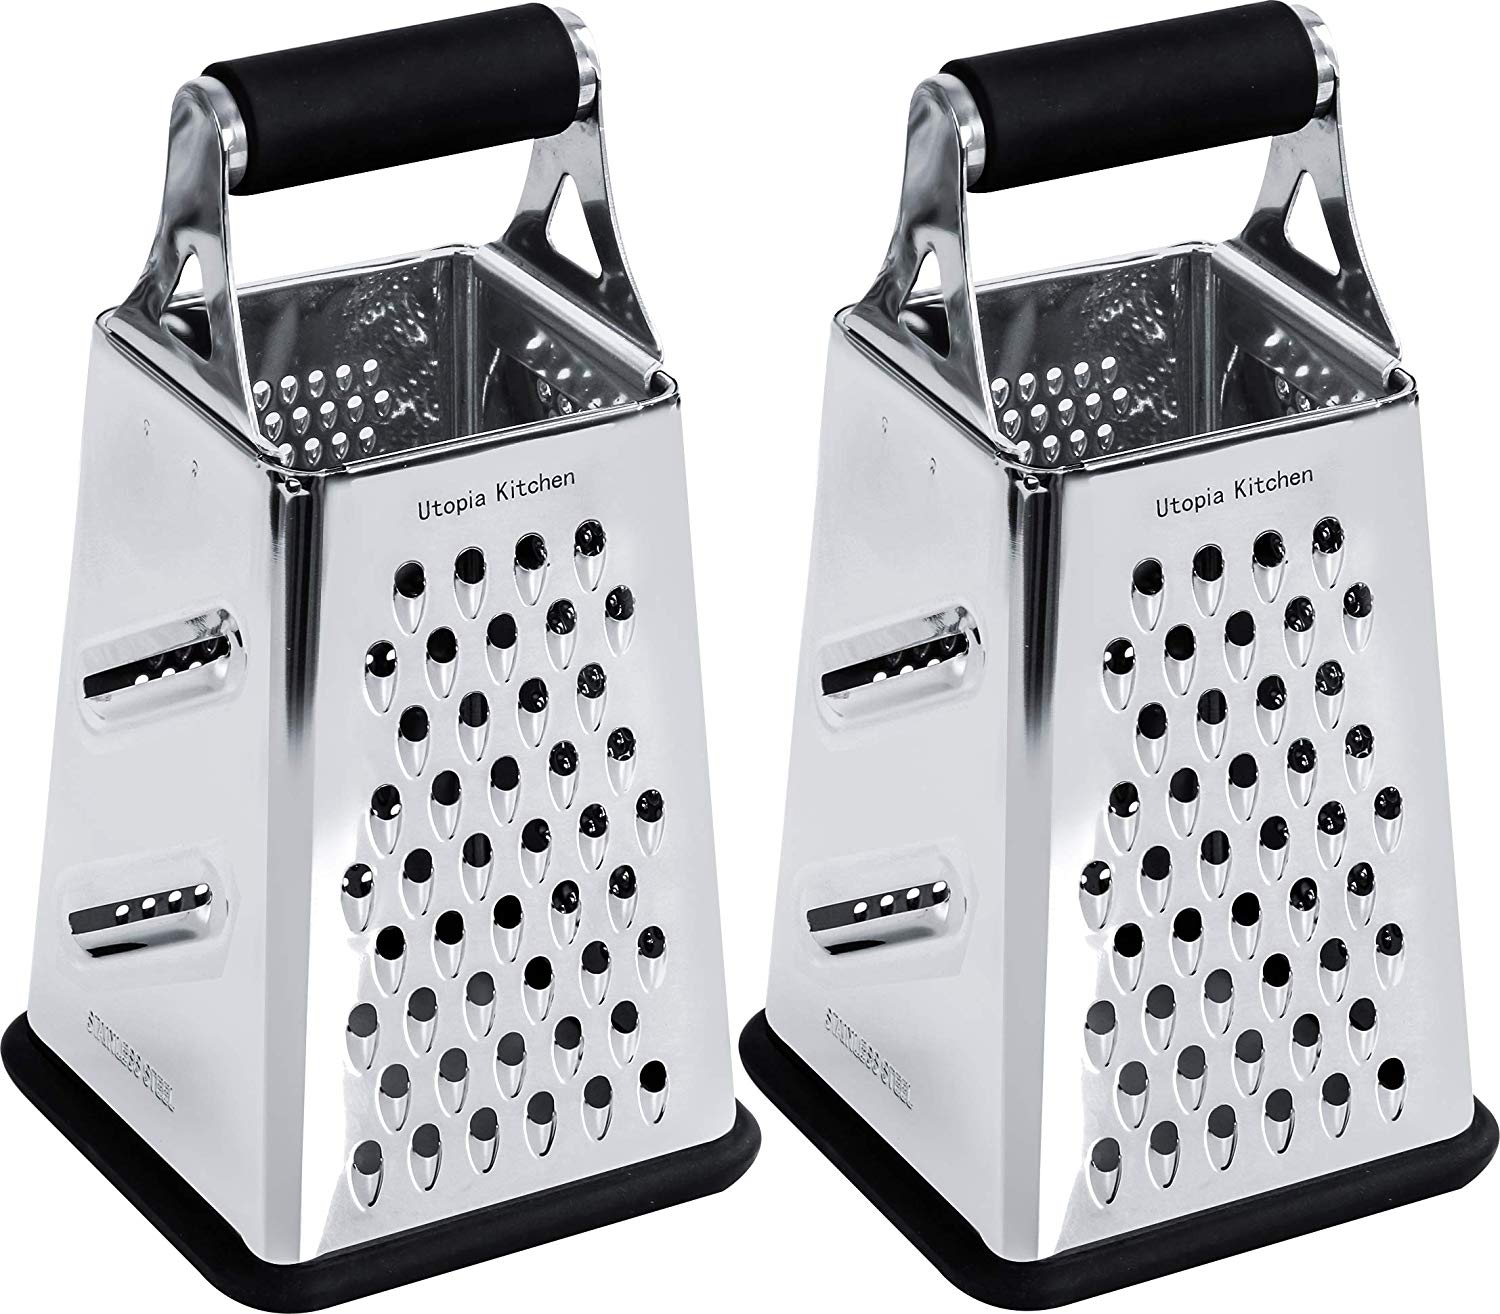 Cheese Grater 4 Sided Cheese Shredder, mozzarella Stainless Steel Kitchen